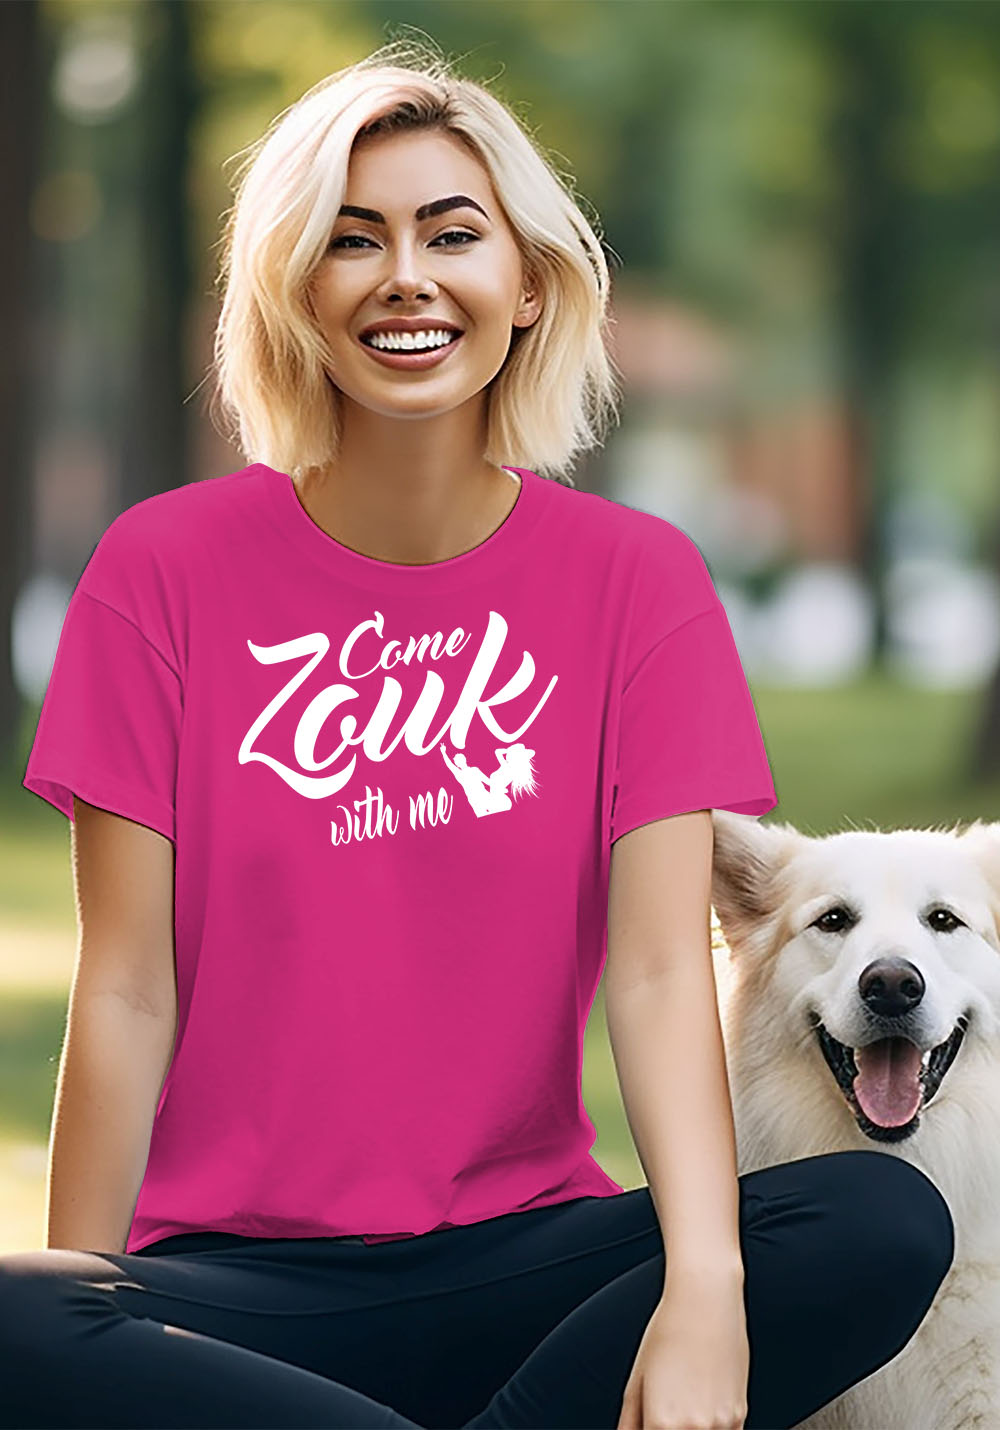 Woman wearing Zouk T-shirt decorated with unique “Come Zouk with me” design in Hot Pink crew neck style